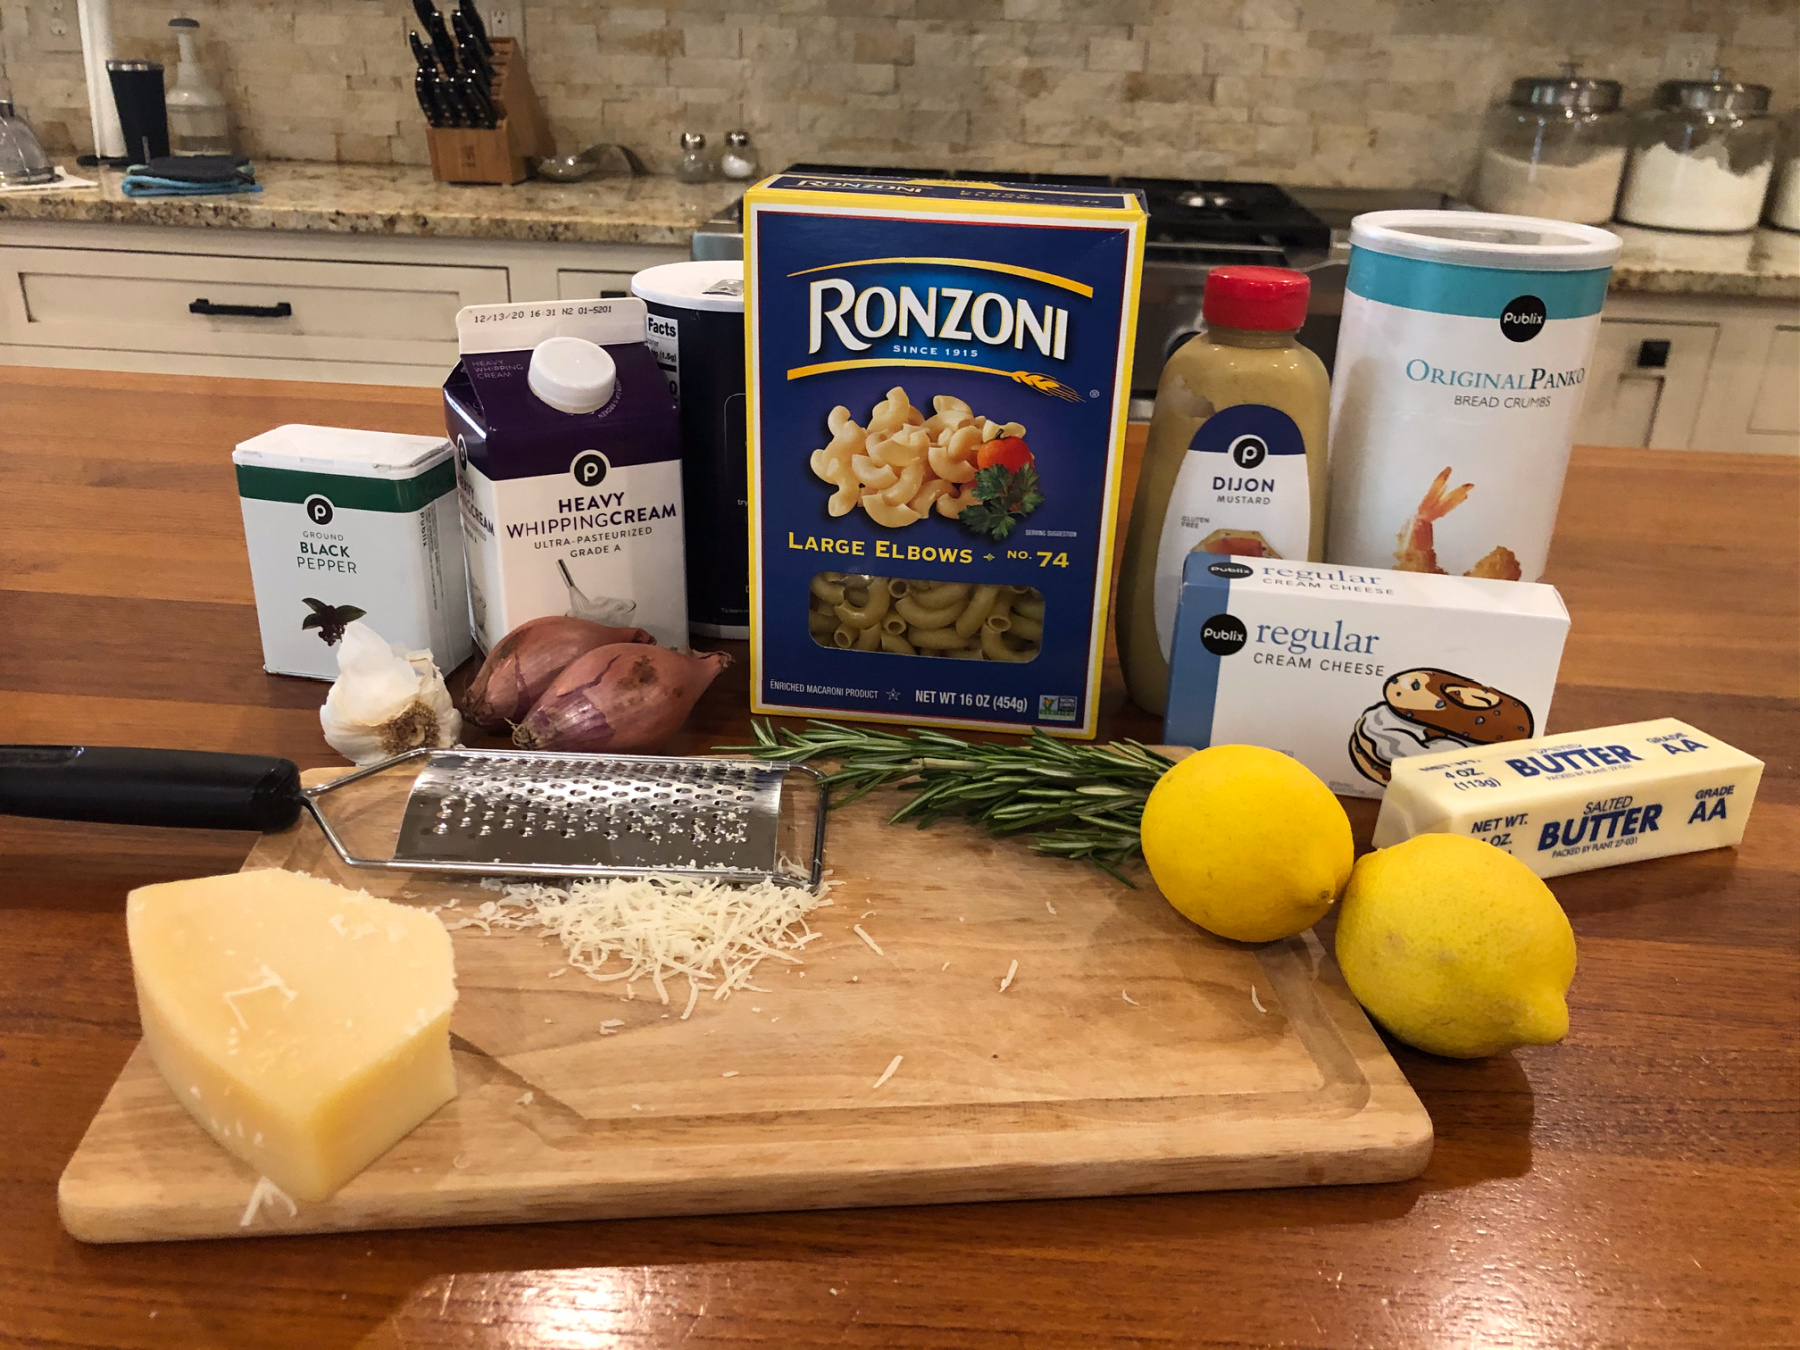 Ronzoni Pasta Is BOGO At Publix - Great Time To Make This Lemon and Rosemary Mac and Cheese on I Heart Publix 1